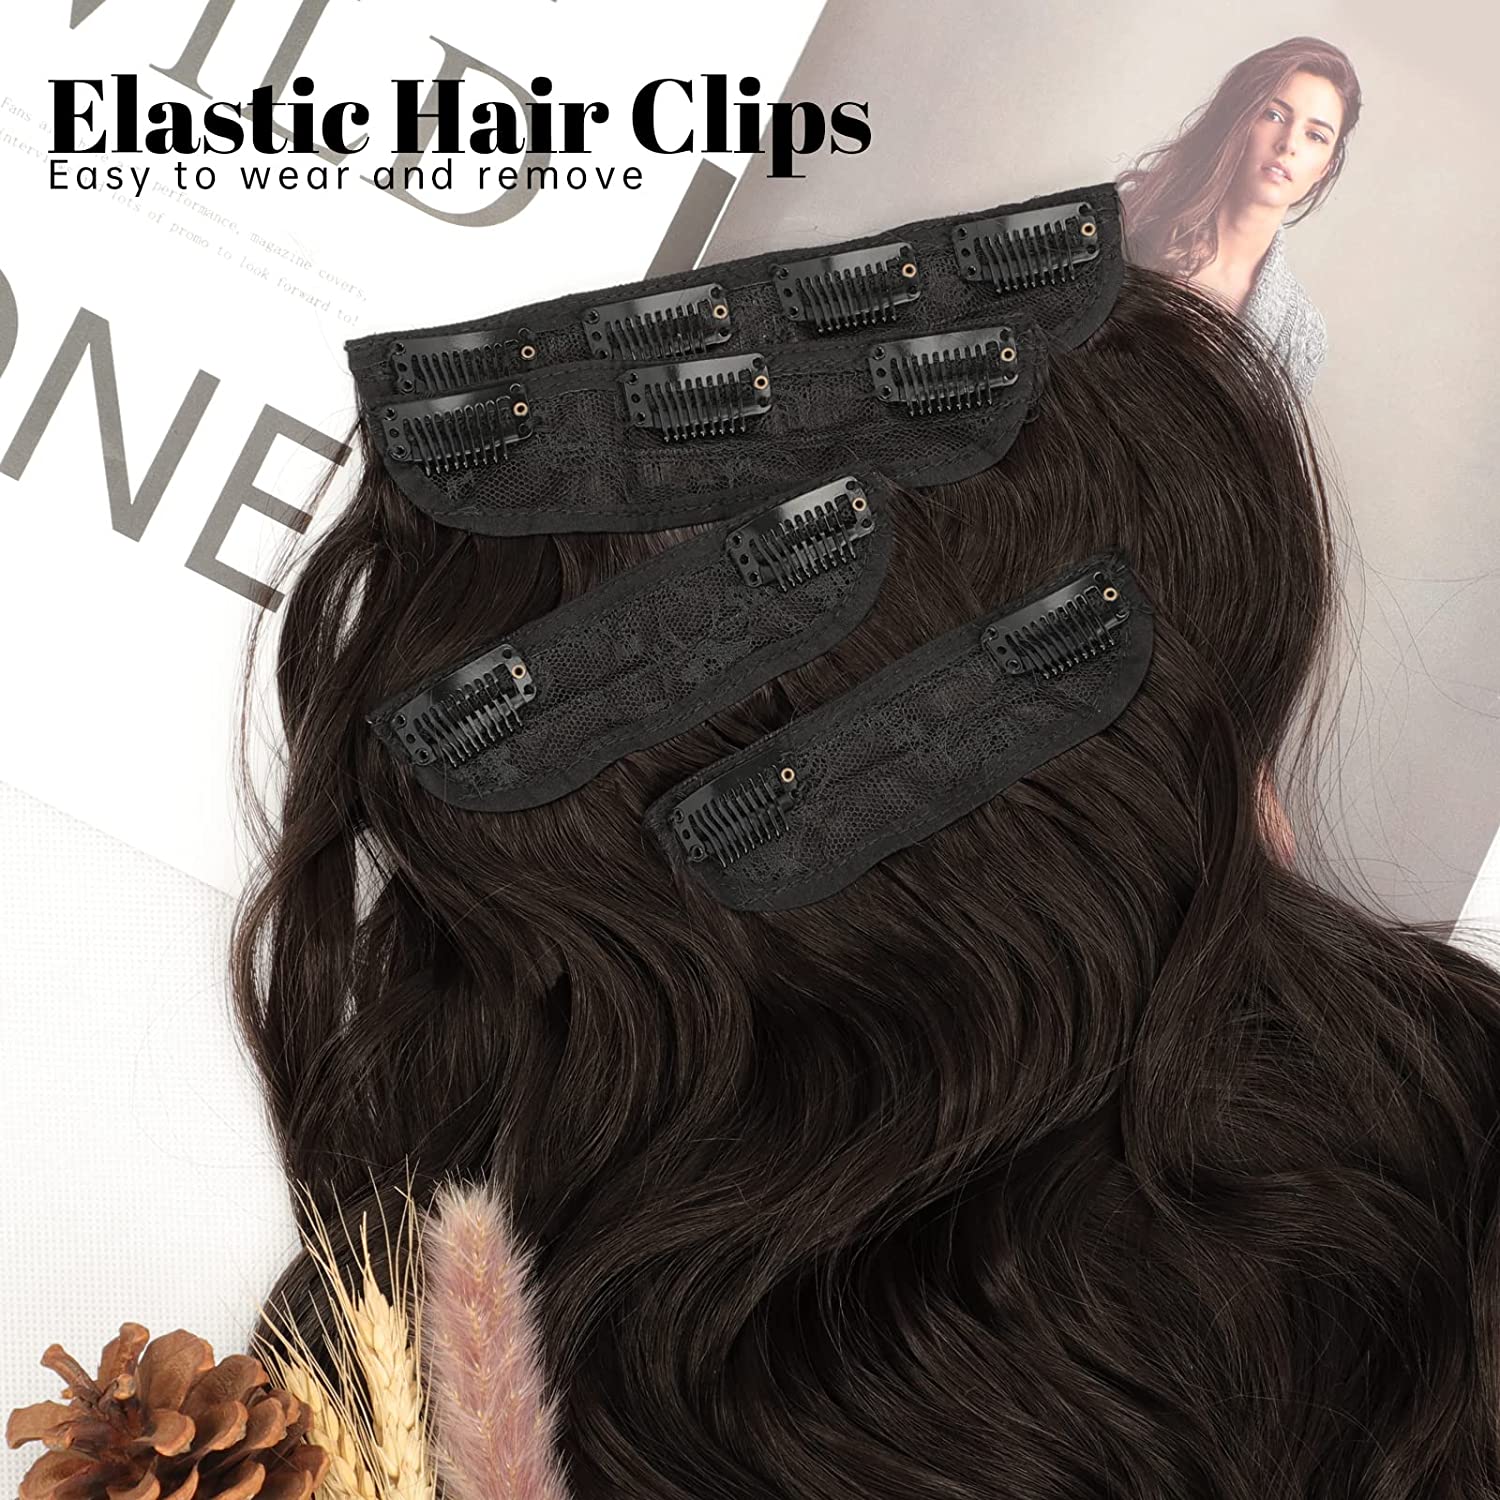 CLIP IN Hair Extensions 100 human hair indian from ABHaircom  YouTube